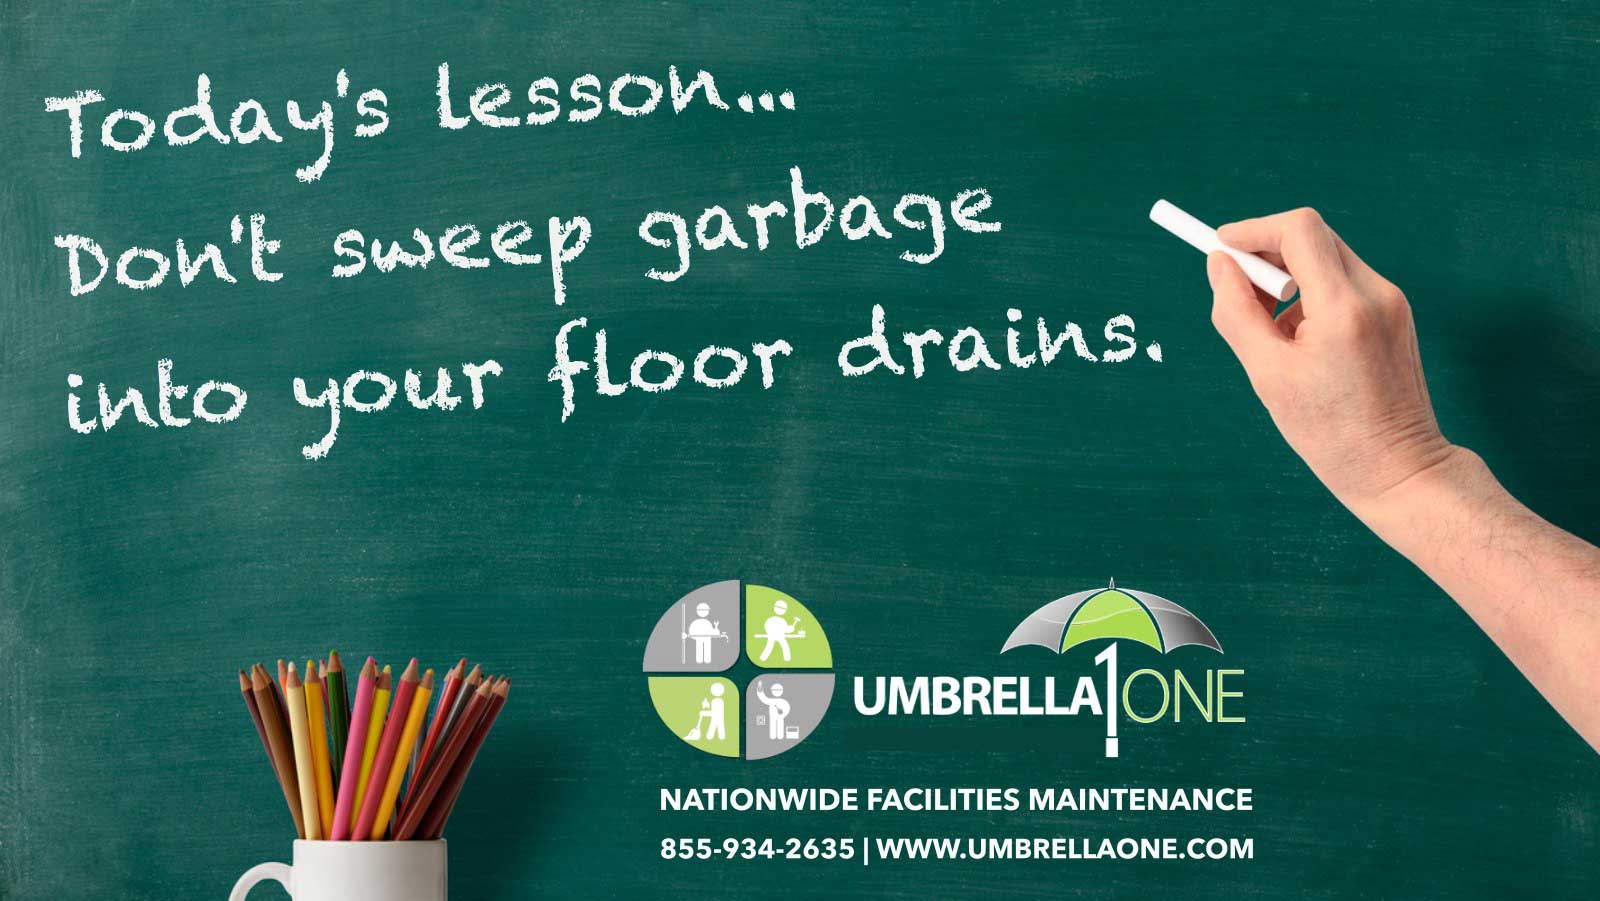 today's lesson: don't sweep garbage into your floor drains